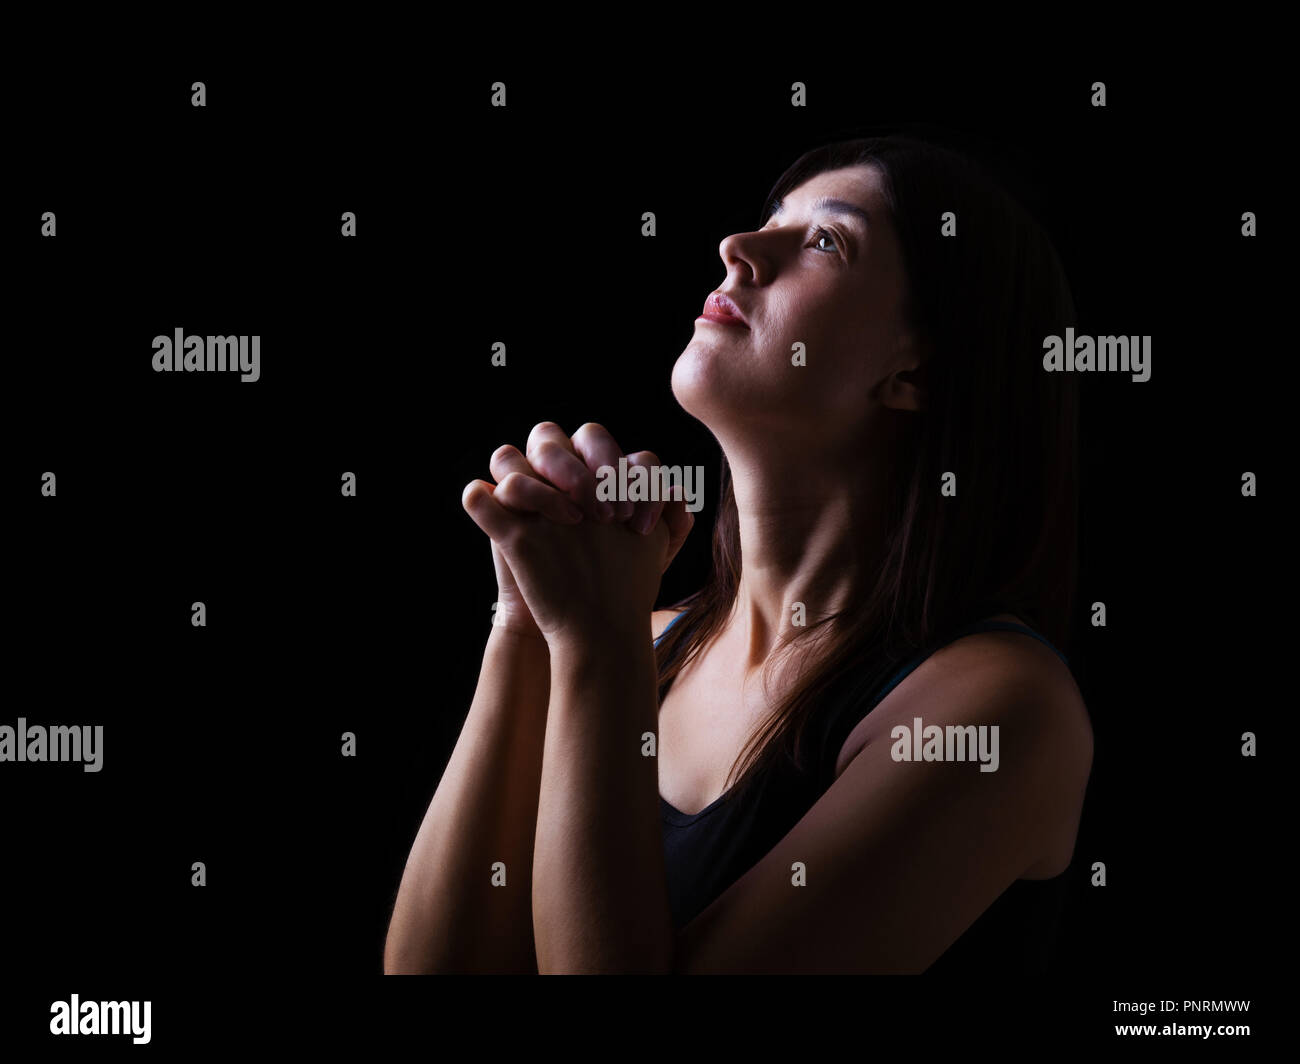 Faithful woman praying, hands folded in worship to god with looking up in religious fervor, on a black background. Concept for religion, faith, prayer Stock Photo